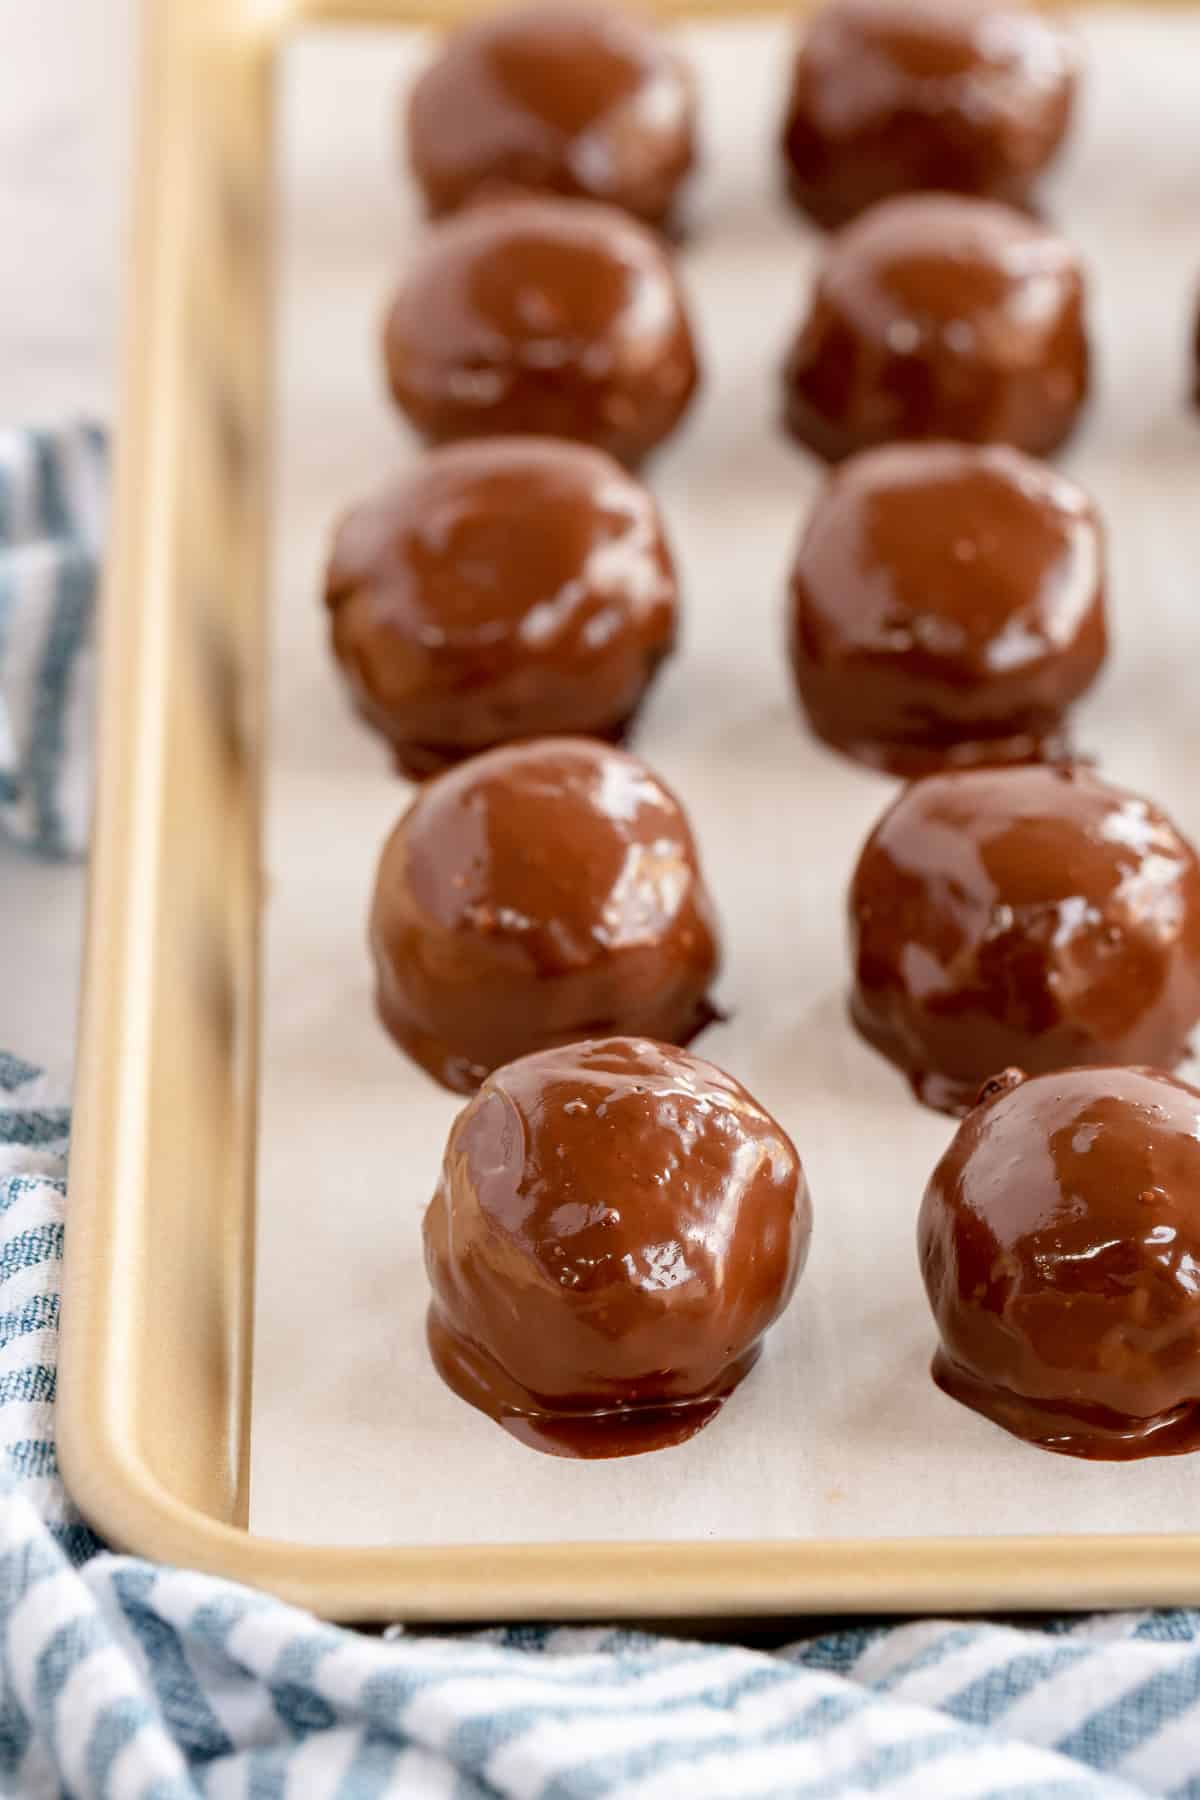 Glossy chocolate dipped bon bons on a parchment paper lined baking sheet.